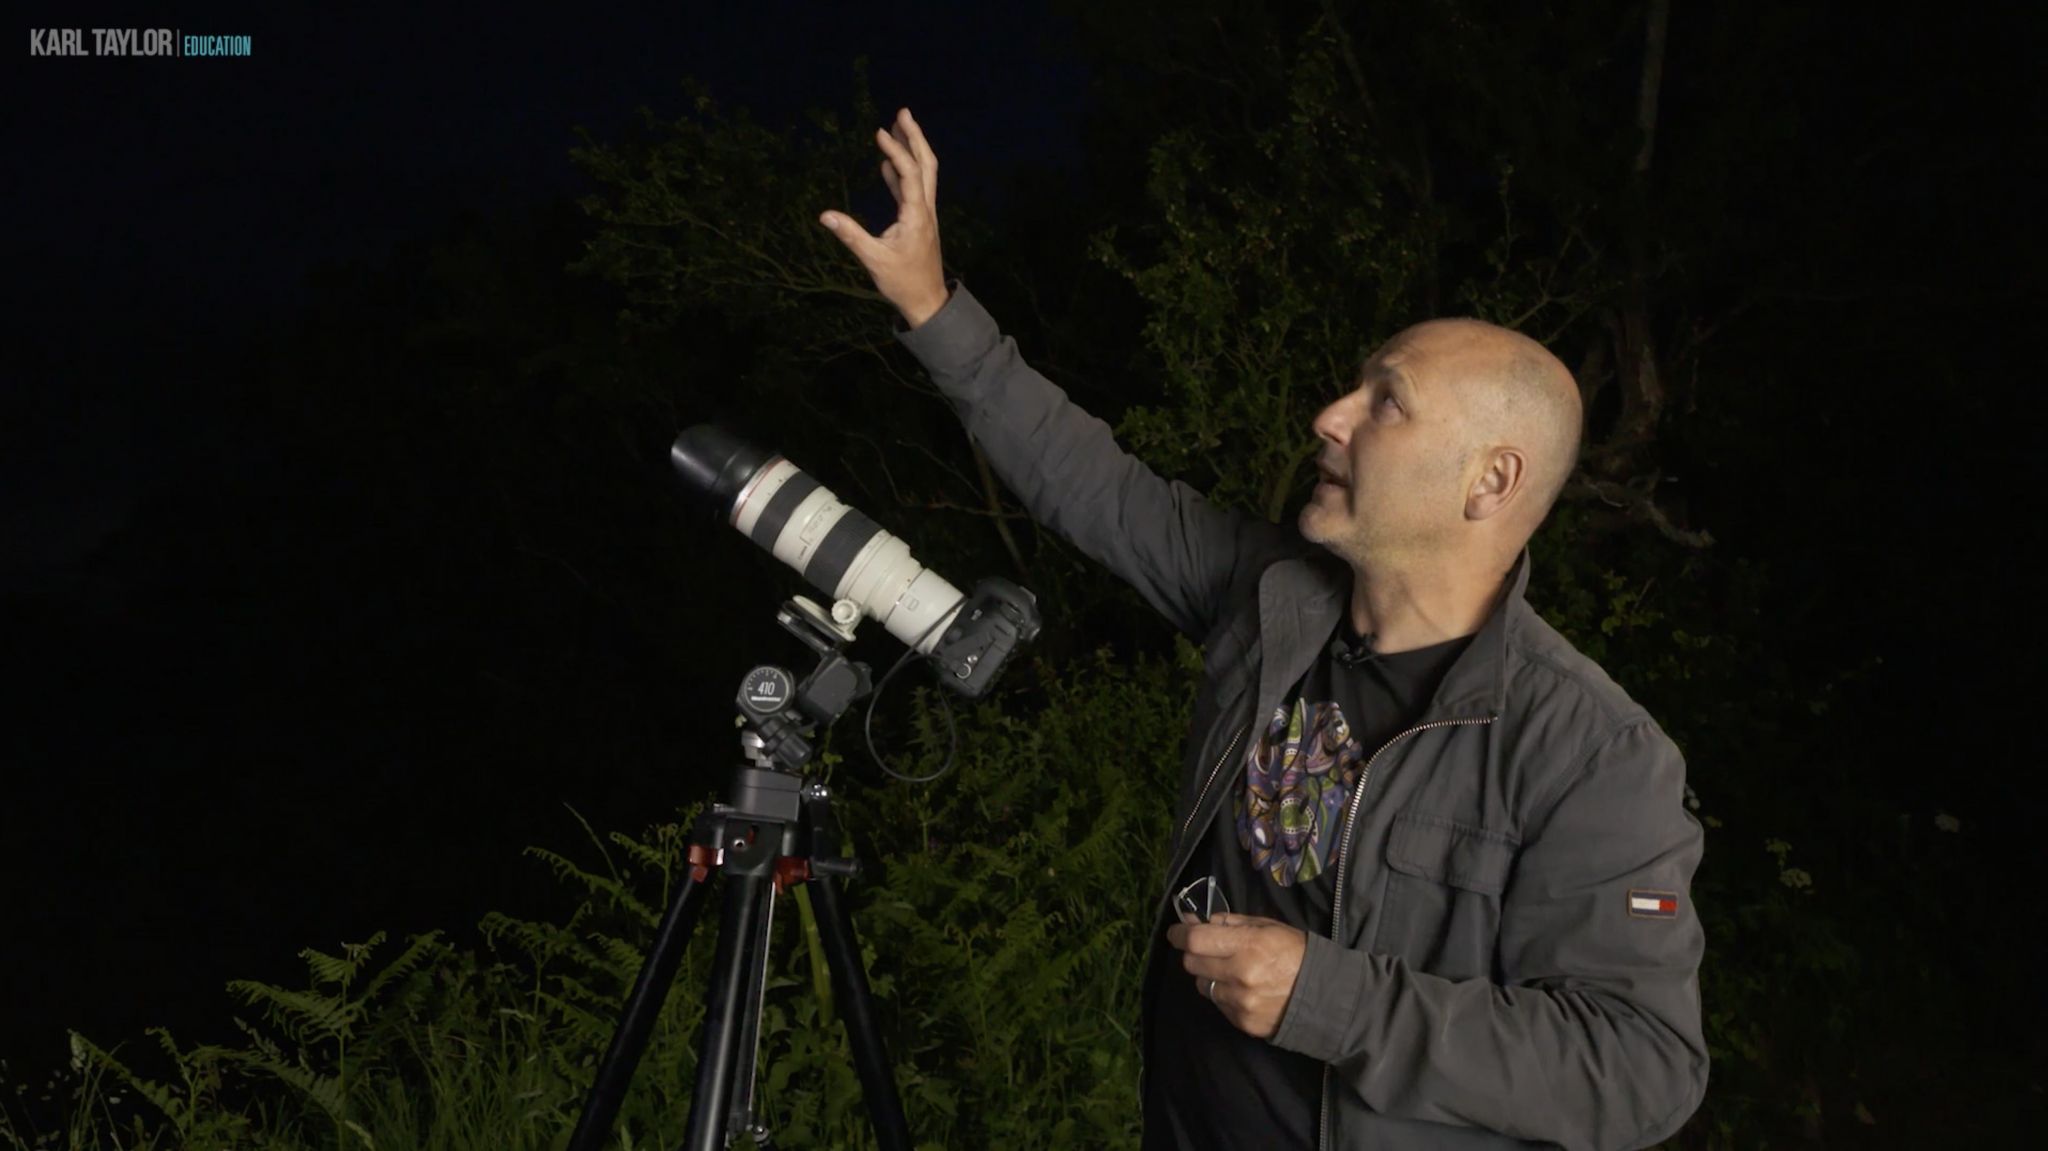 How to Photograph the Moon: Equipment, Camera Settings and Tips